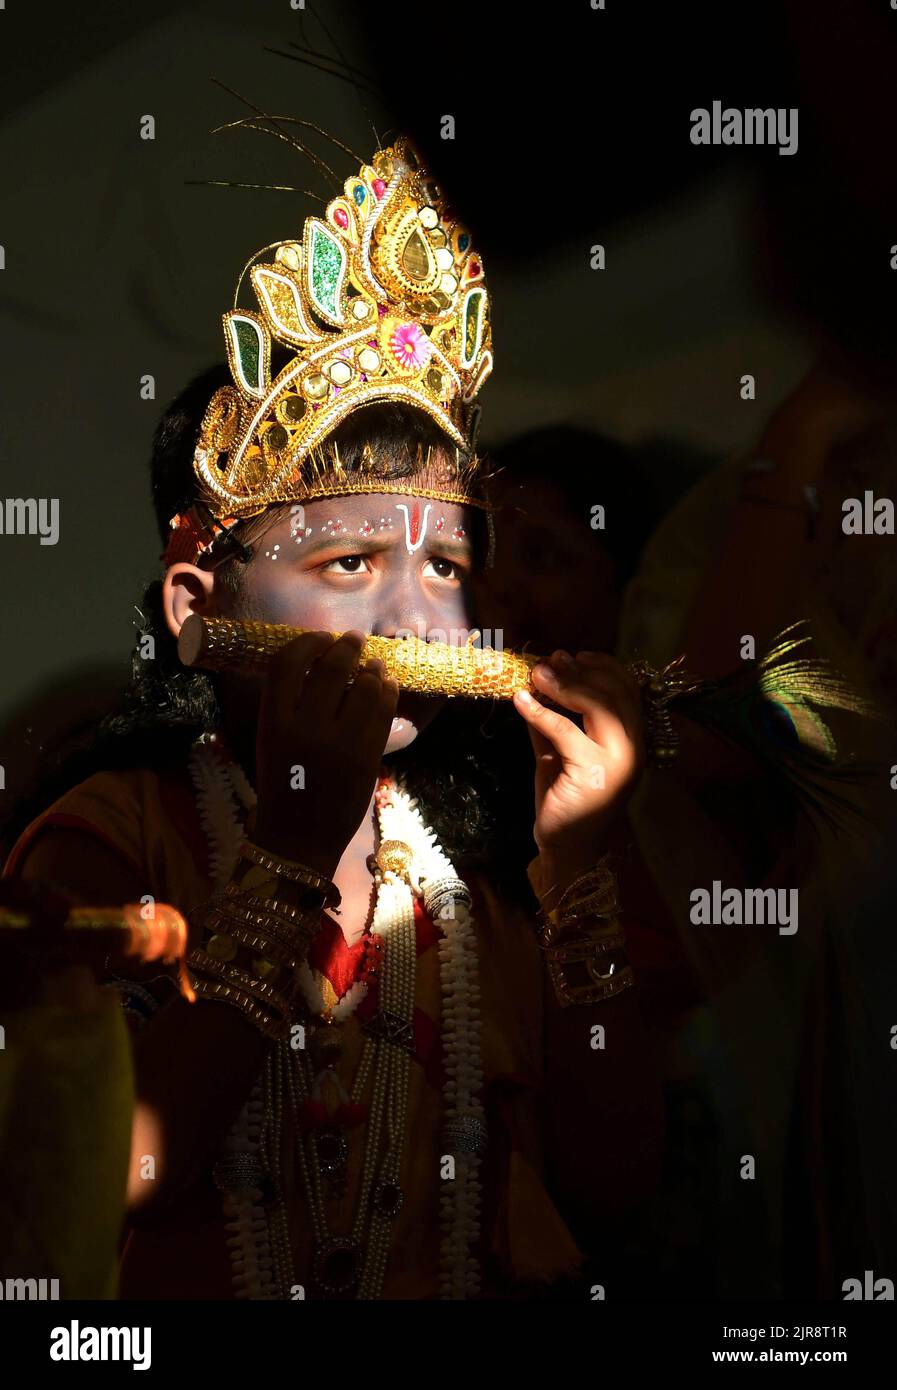 children dressed as lord krishna participate in a dress competition during celebrations to mark the janmashtami occasion of birth of lord krishna a hindu festival at the sri krishna temple in agartala tripura india 2JR8T1R